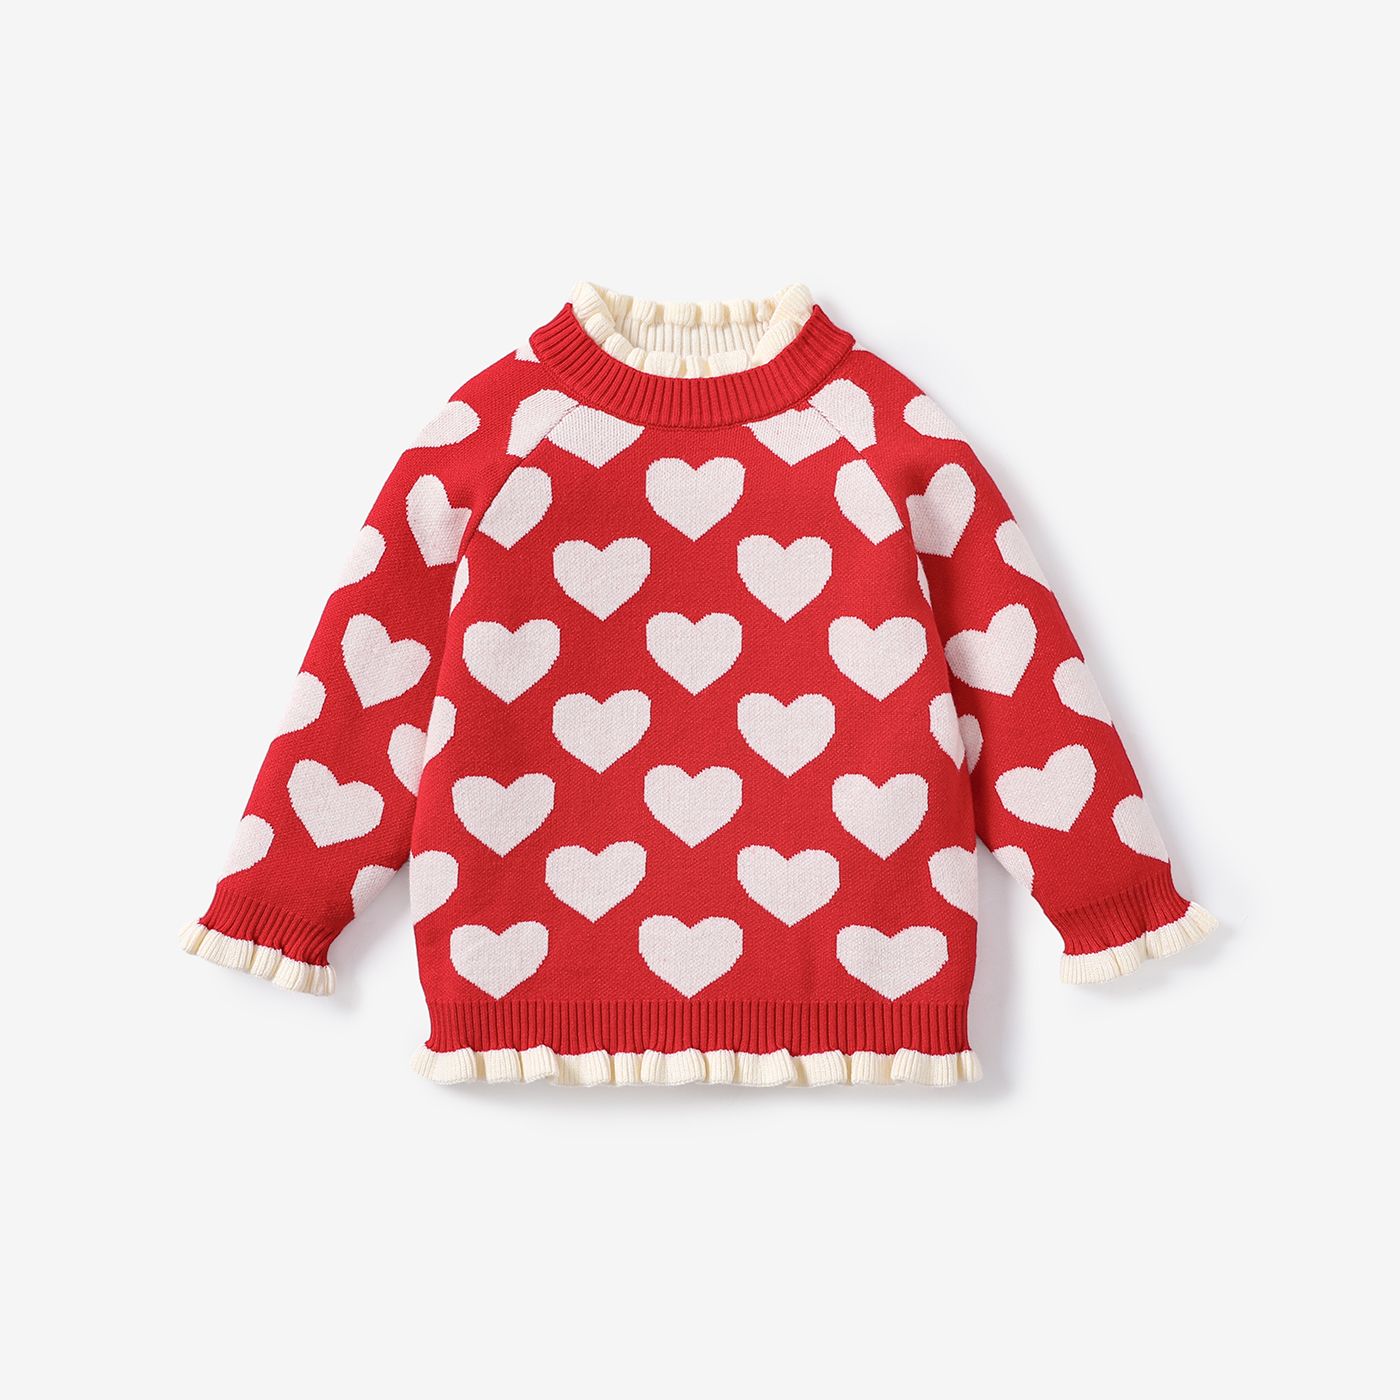 Toddler Girls Sweet Heart-shaped Faux Layered Design Sweater